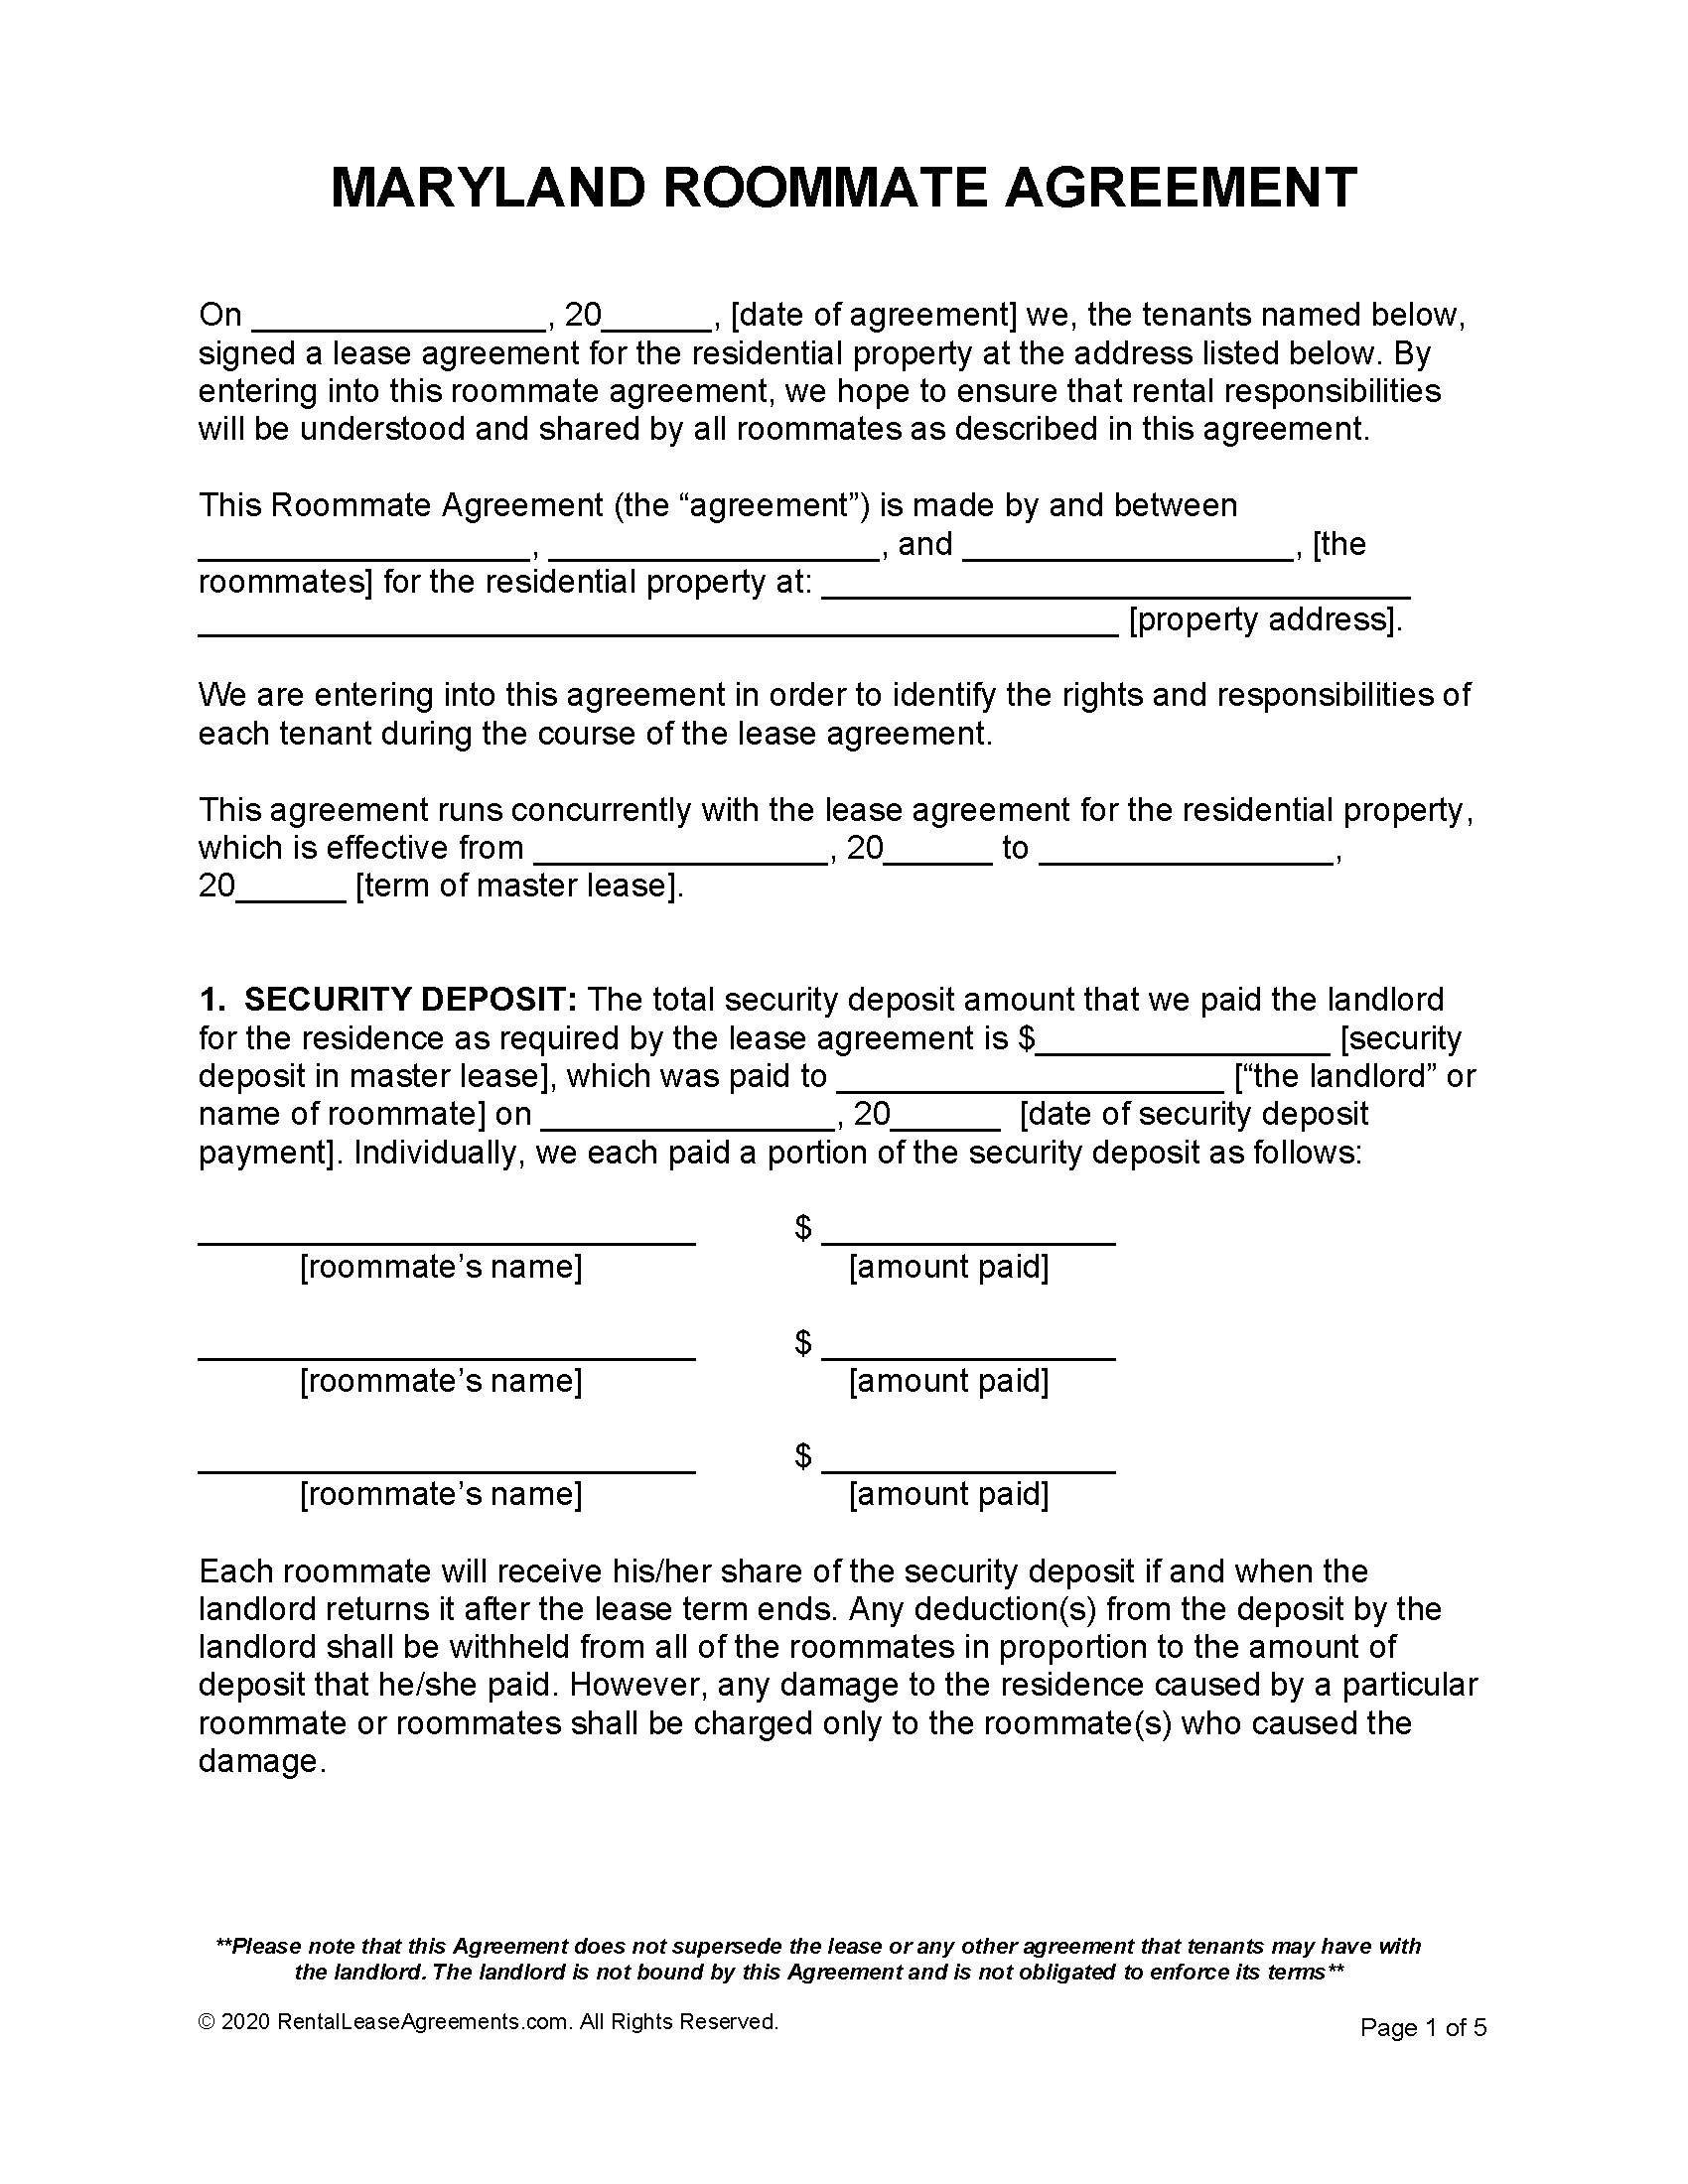 Maryland Roommate Agreement PDF MS Word Free Printable Rental Lease Agreement Templates